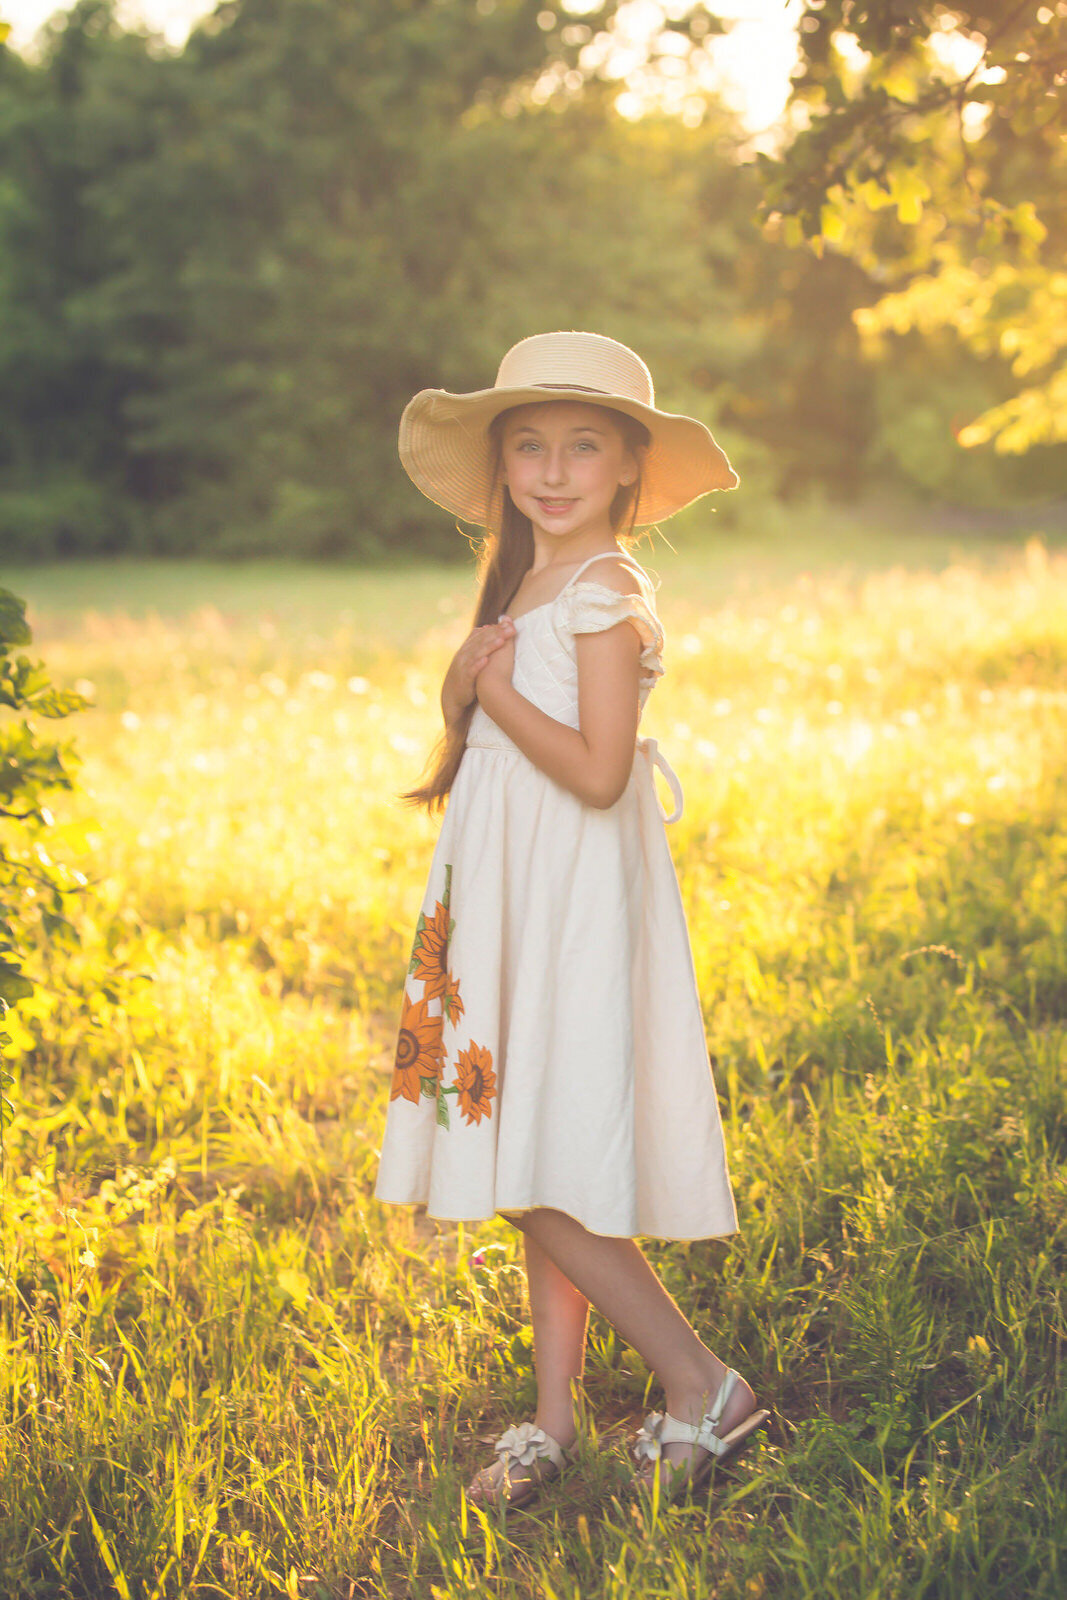 girl-in-sun-wearing-white-dress-and-hat